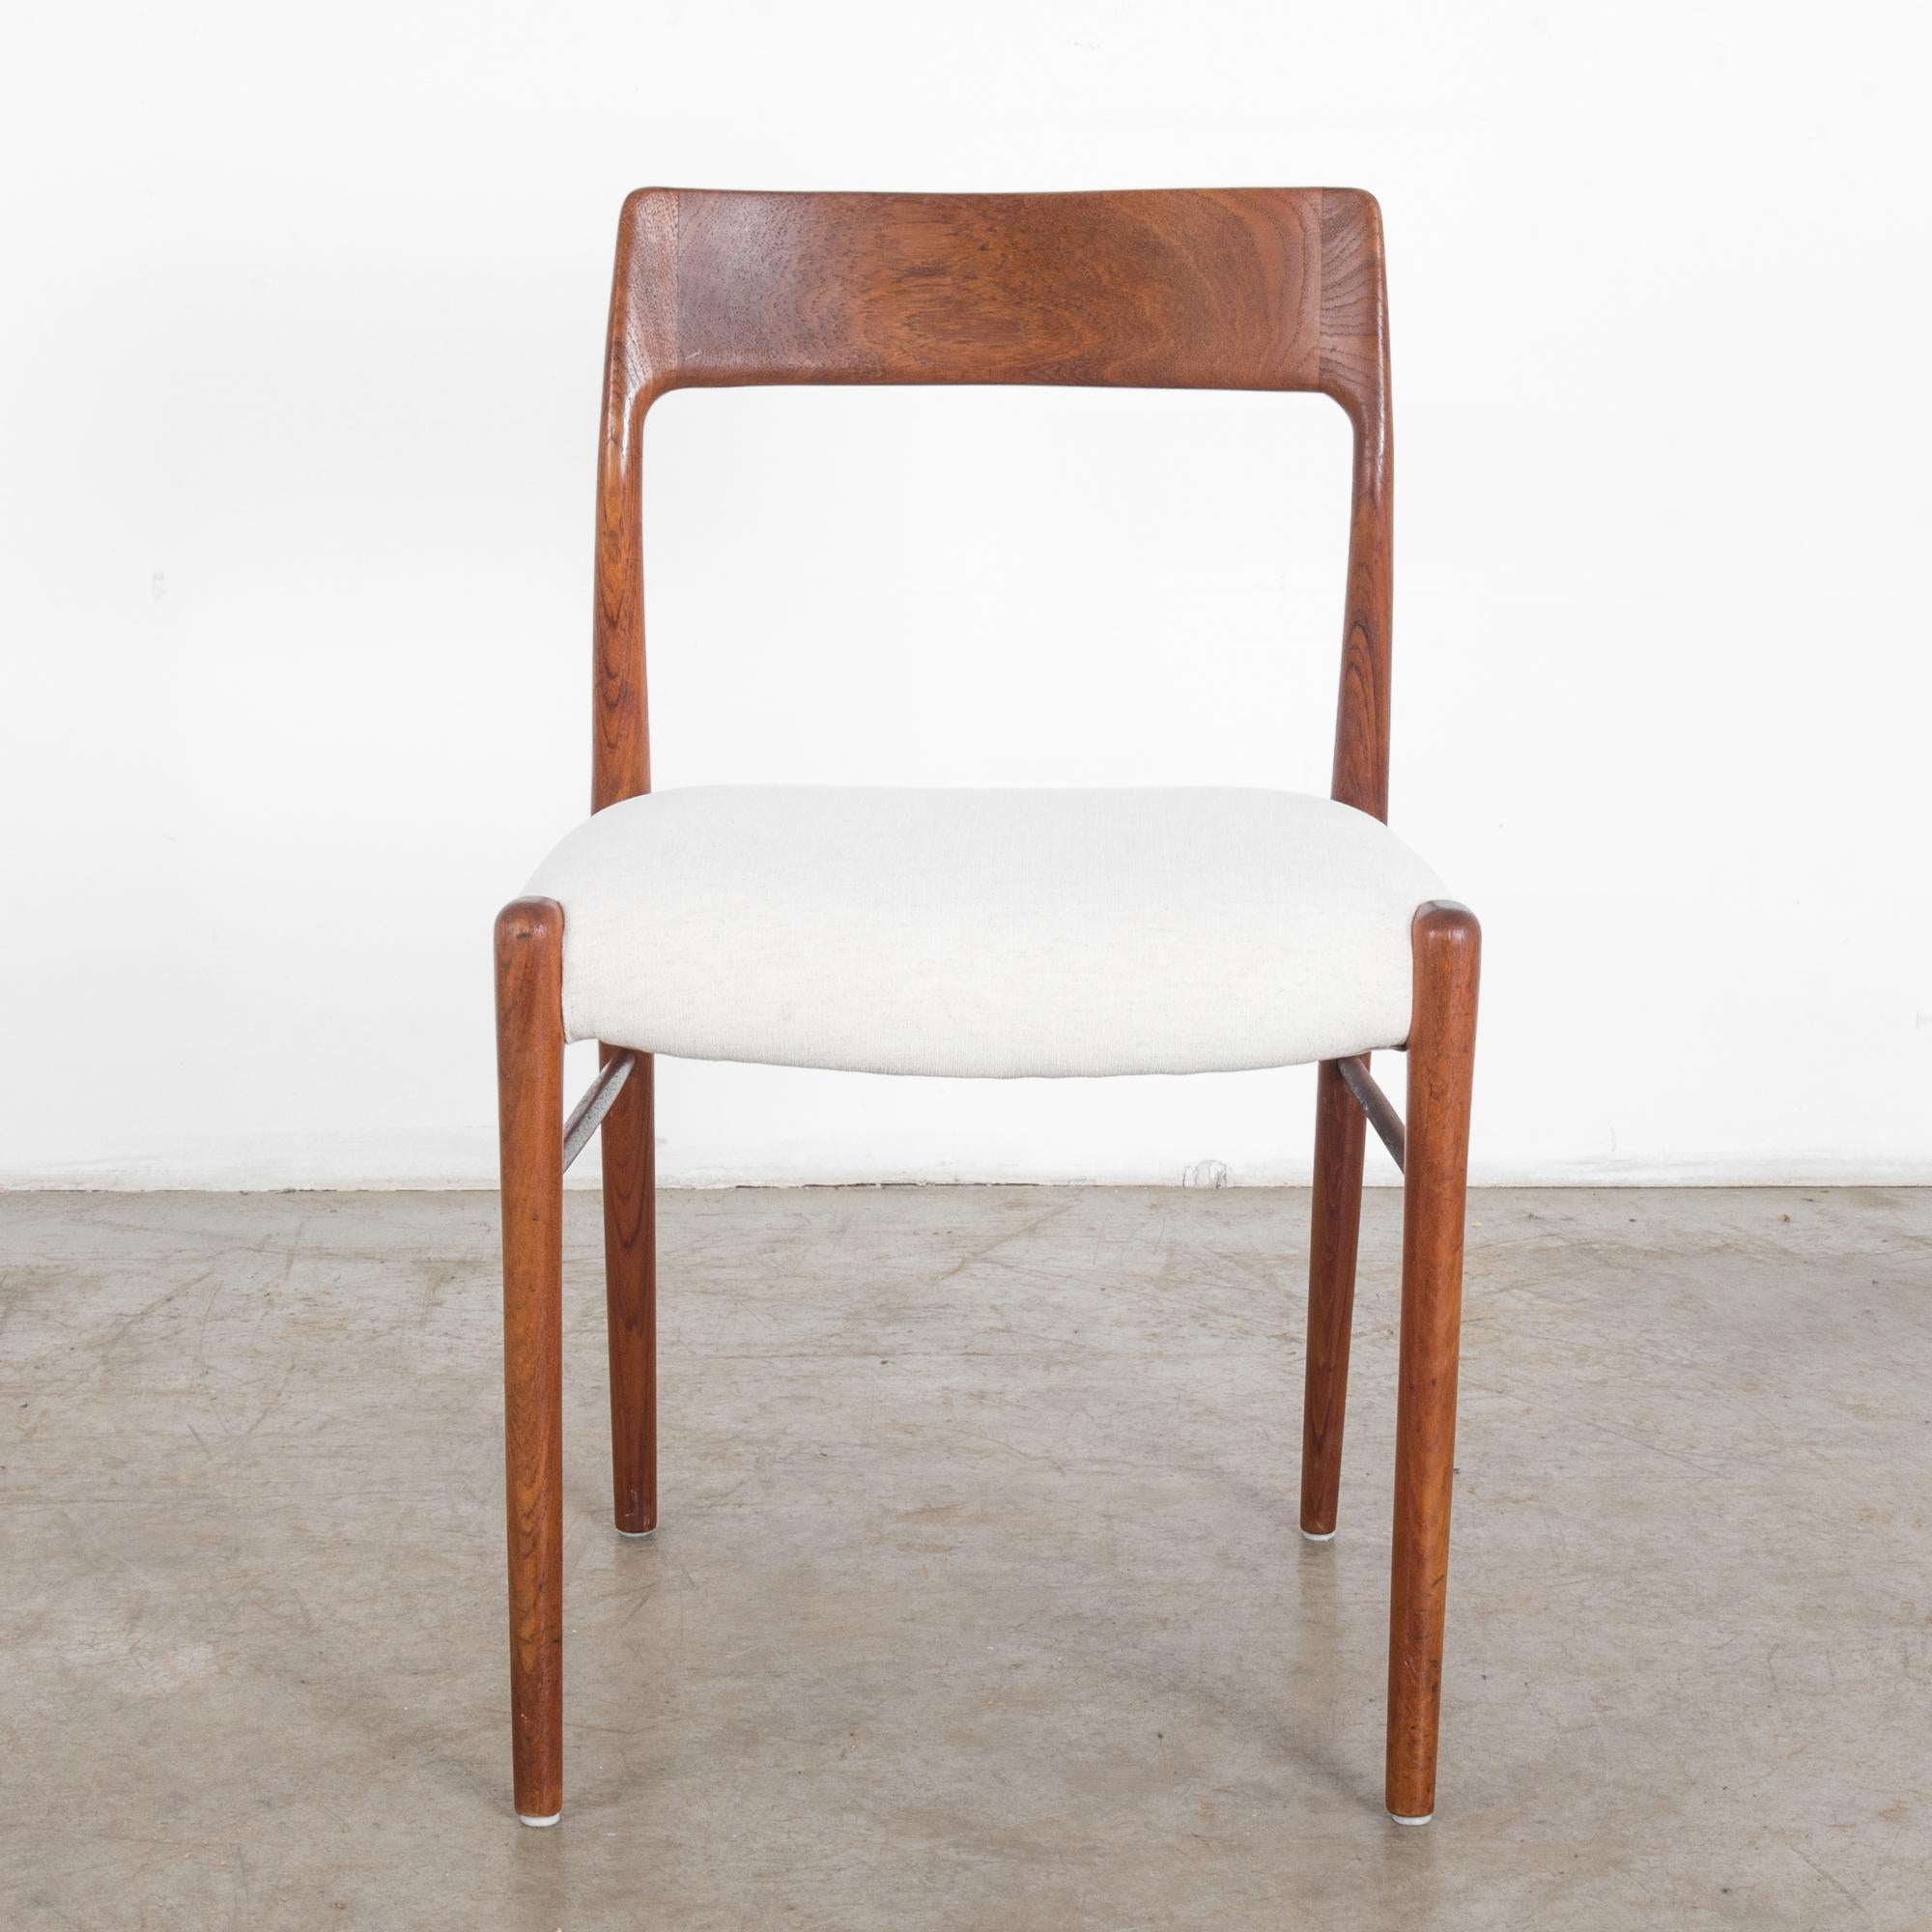 A modern Classic, by Danish designer Niels Moller. Refreshed and reupholstered in our atelier, the No. 77 chair has a structured look, stylish and casual. Rounded corners, fluid angles and curves add subtlety to the minimal shape. Warm oiled teak